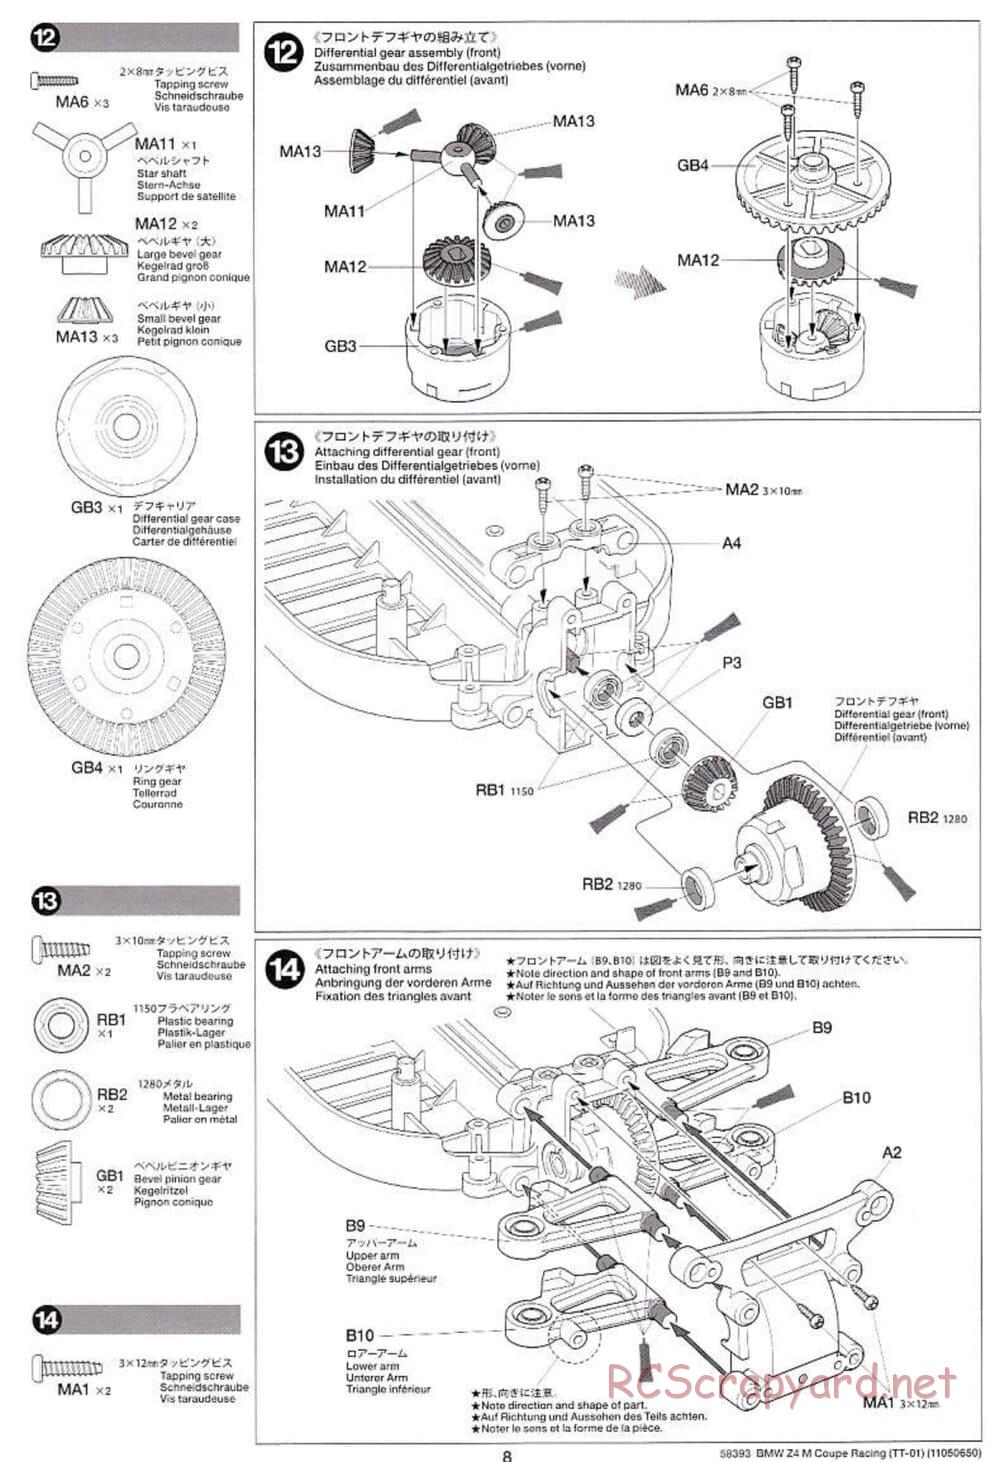 Tamiya - BMW Z4 M Coupe Racing - TT-01 Chassis - Manual - Page 8